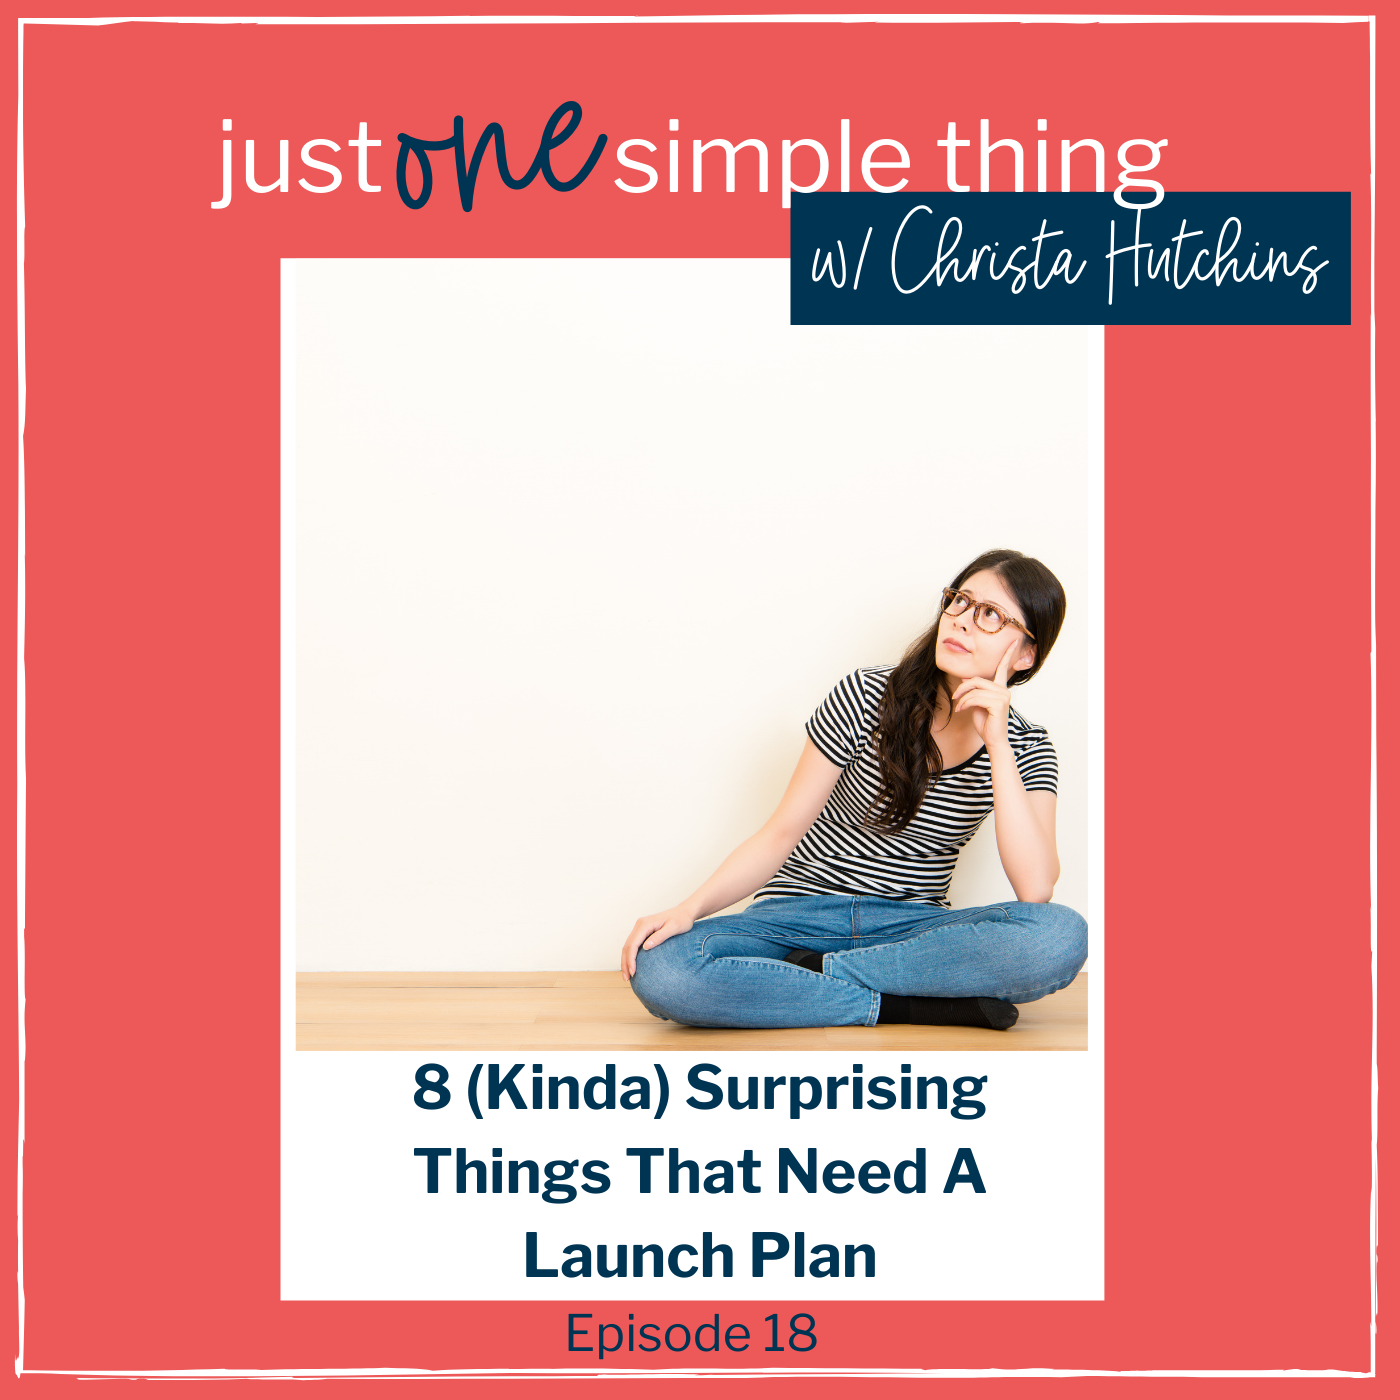 8 (Kinda) Surprising Things That Need a Launch Plan